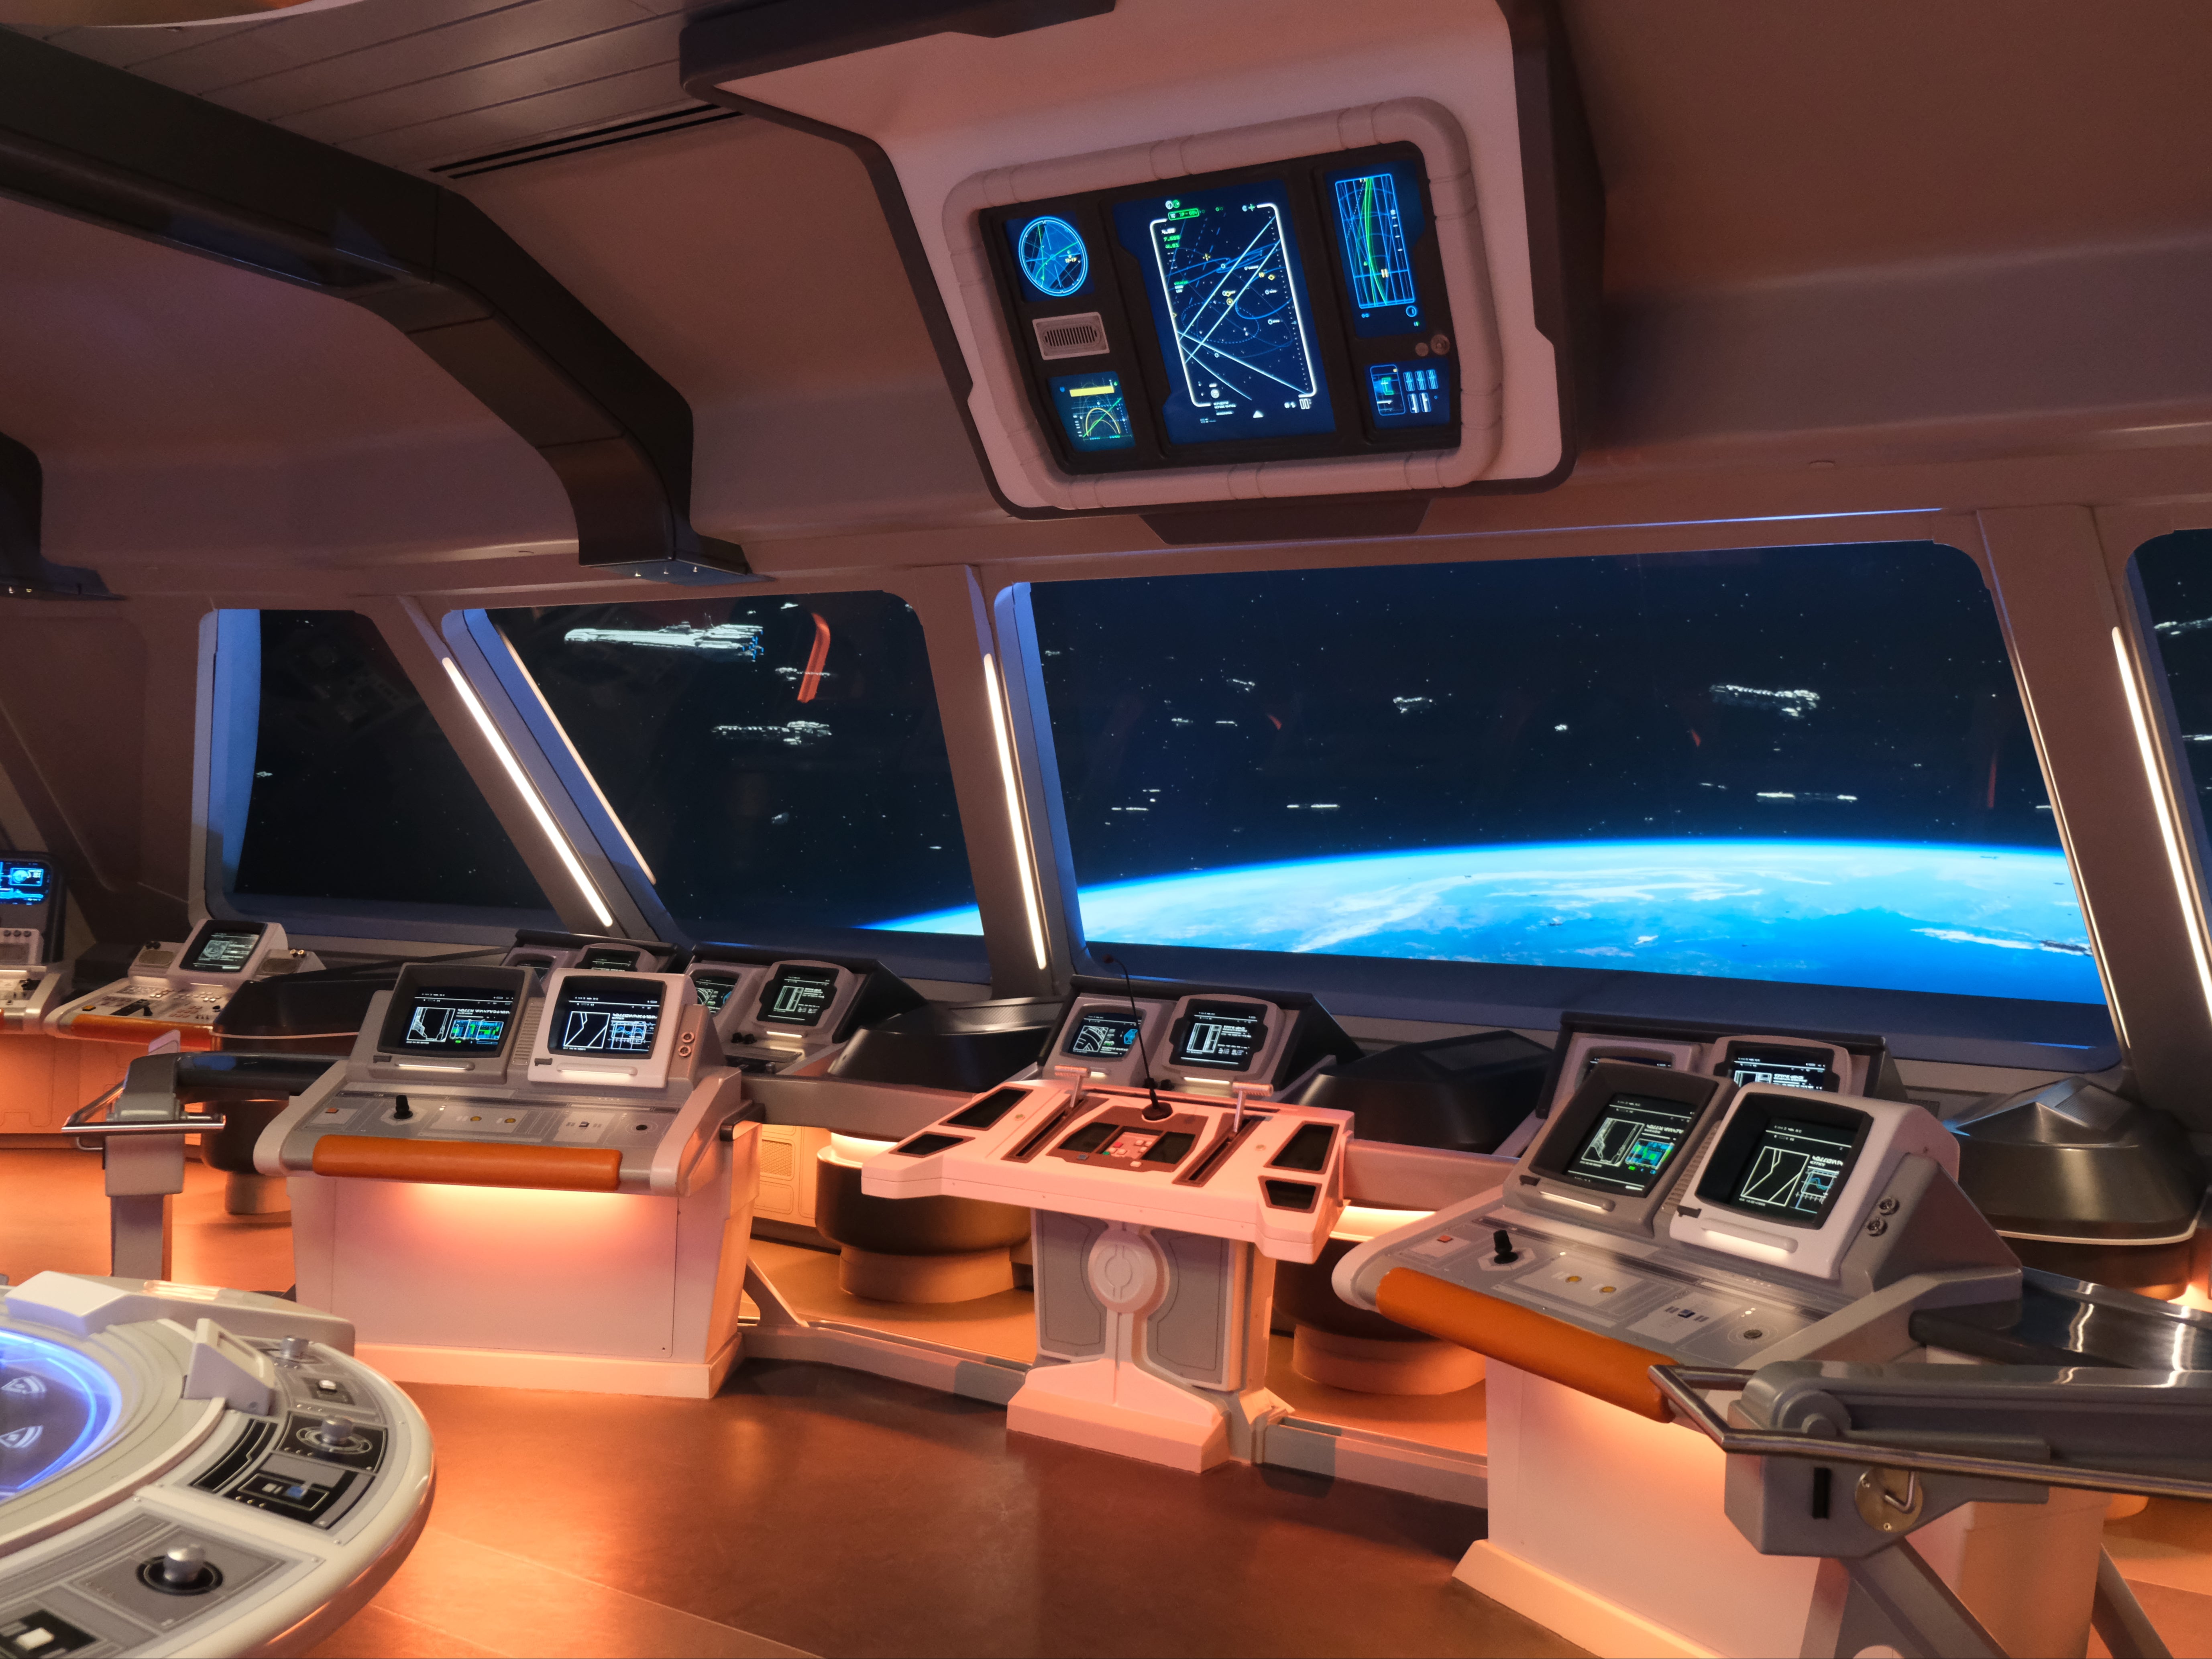 Star Wars Galactic Starcruiser Adventure brings the franchise to life for fans